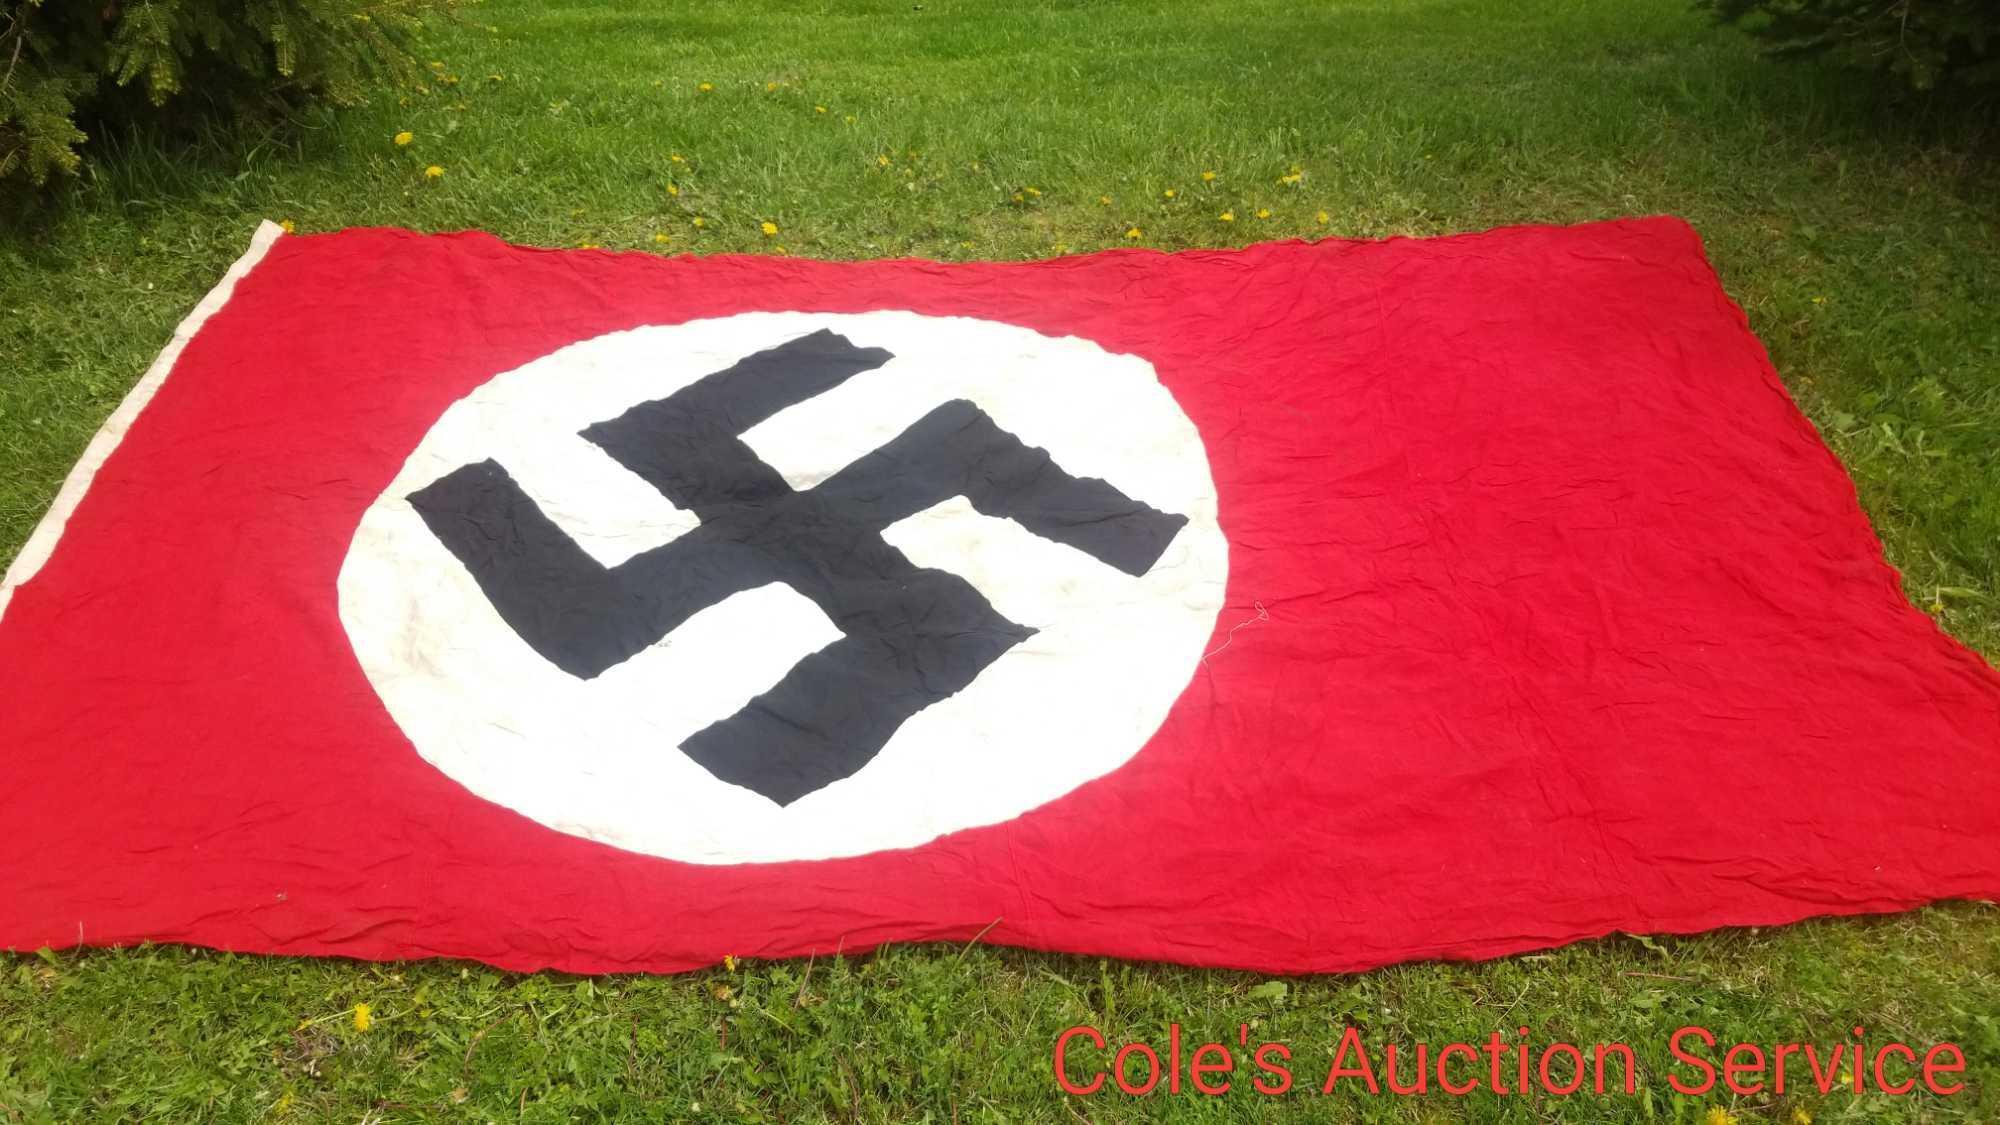 Large German Nazi flag that measures 9ft x 6ft. Note, we do not condone the atrocities committed by